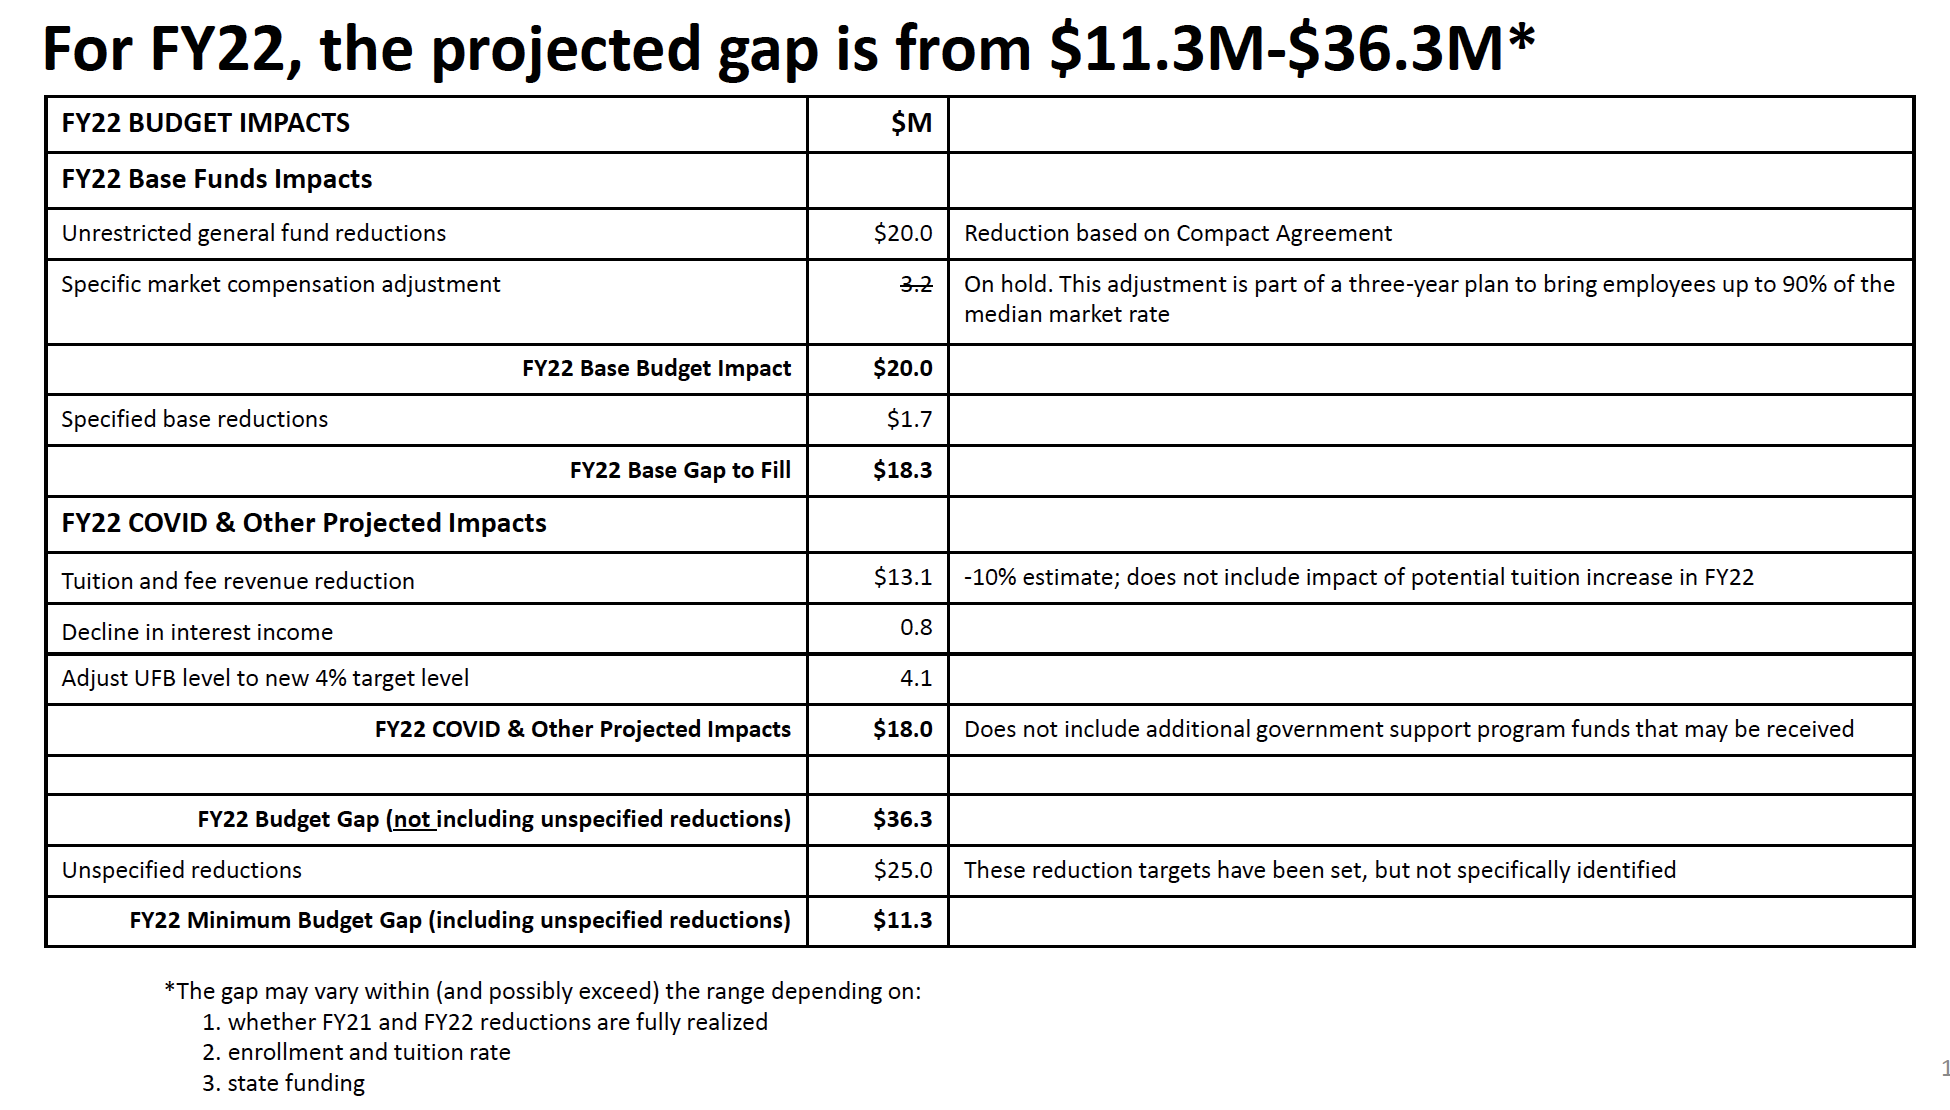 For FY22 the projected budget gap is from $11.3. M - $36.3 M